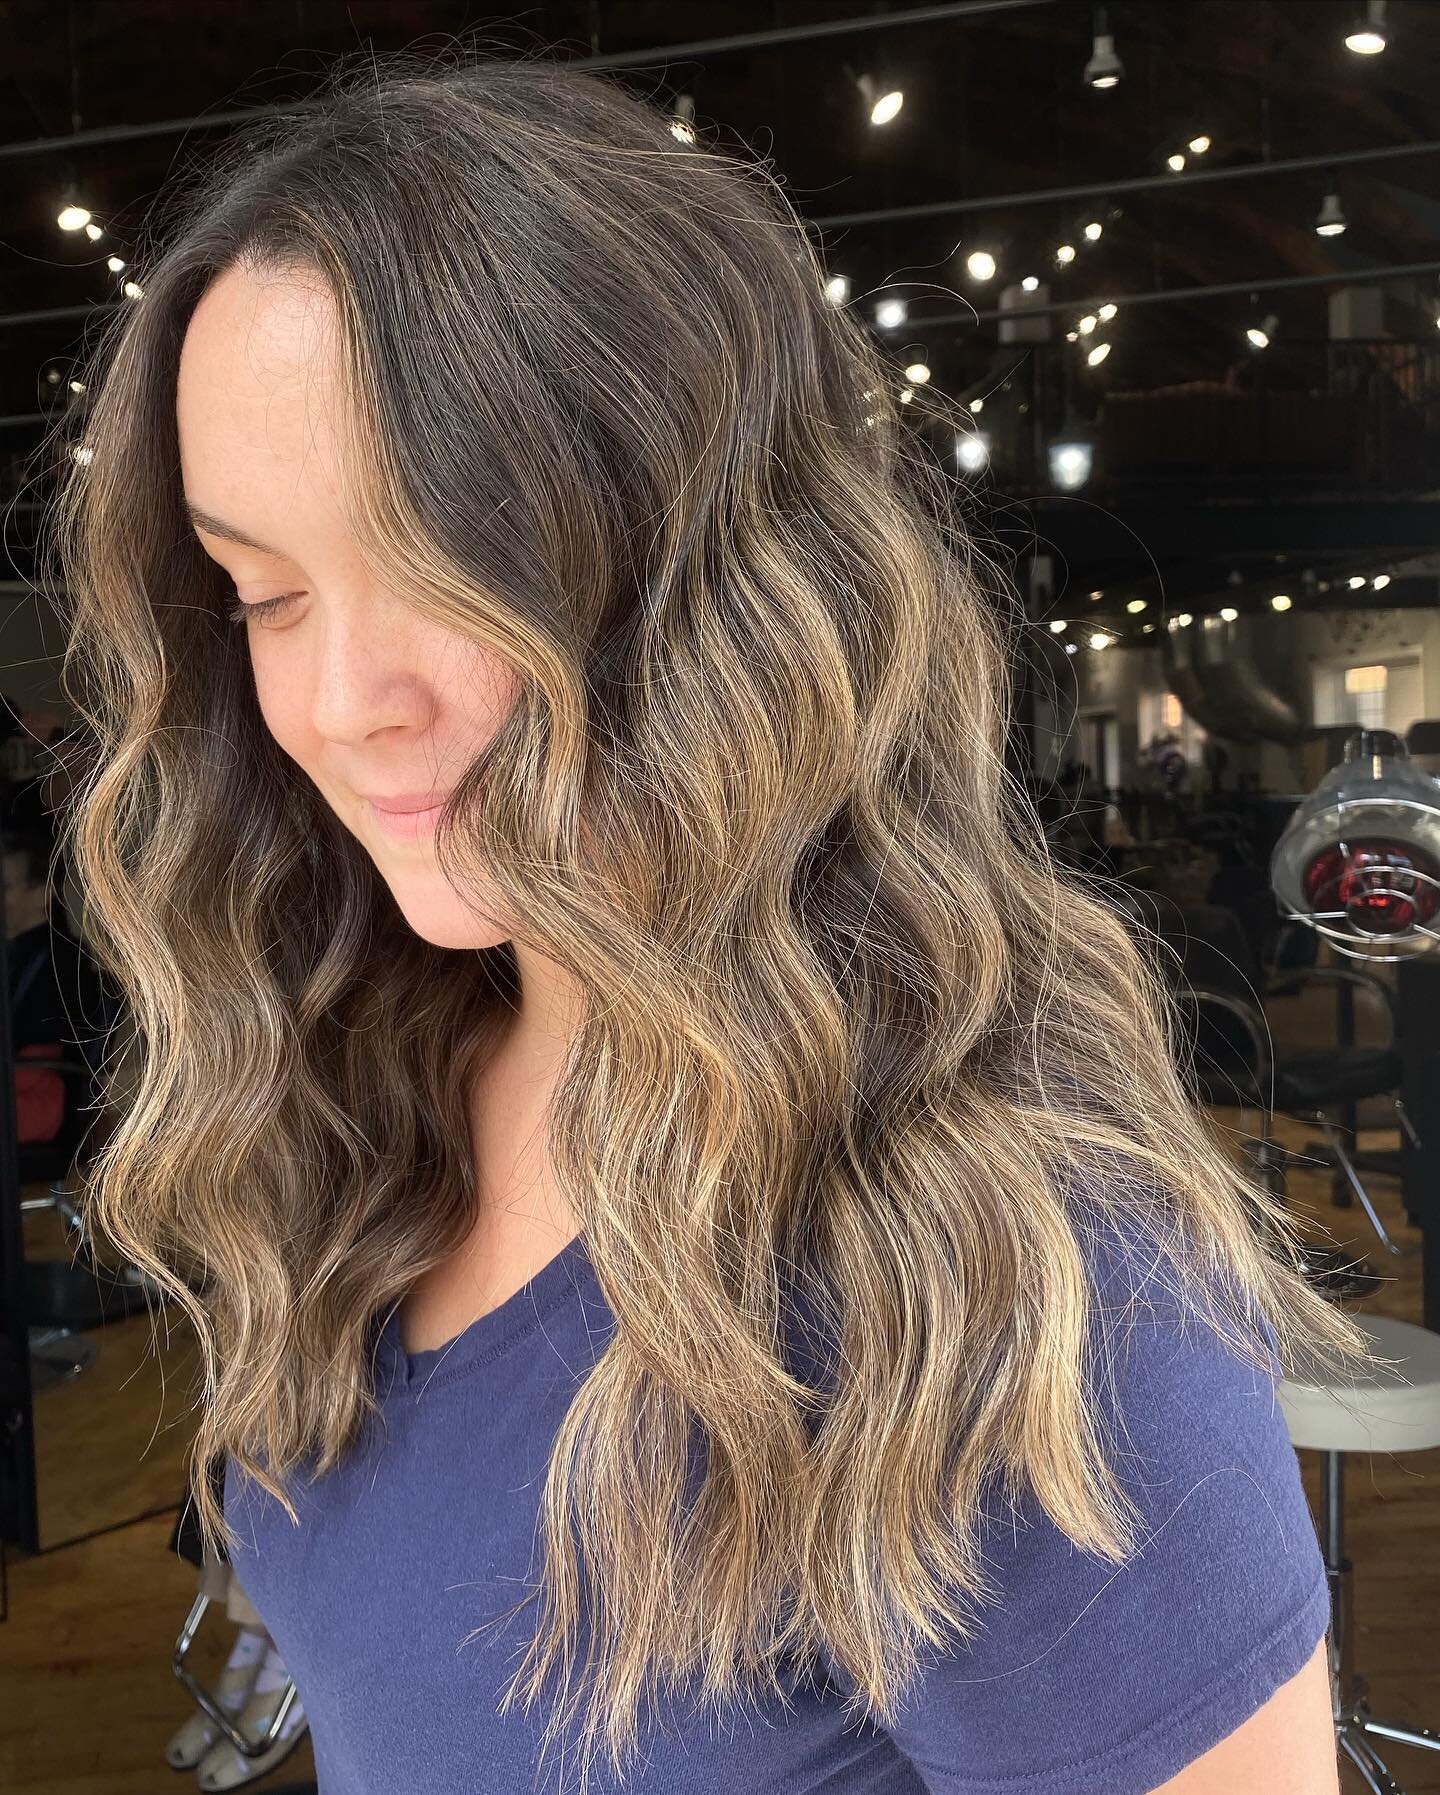 Grown out highlights to a blended balayage!! 

#balayage #teasylightsandbalayage #fall #fallhair #stlstylist #stlhair #stylist #webster #stl #stlouis